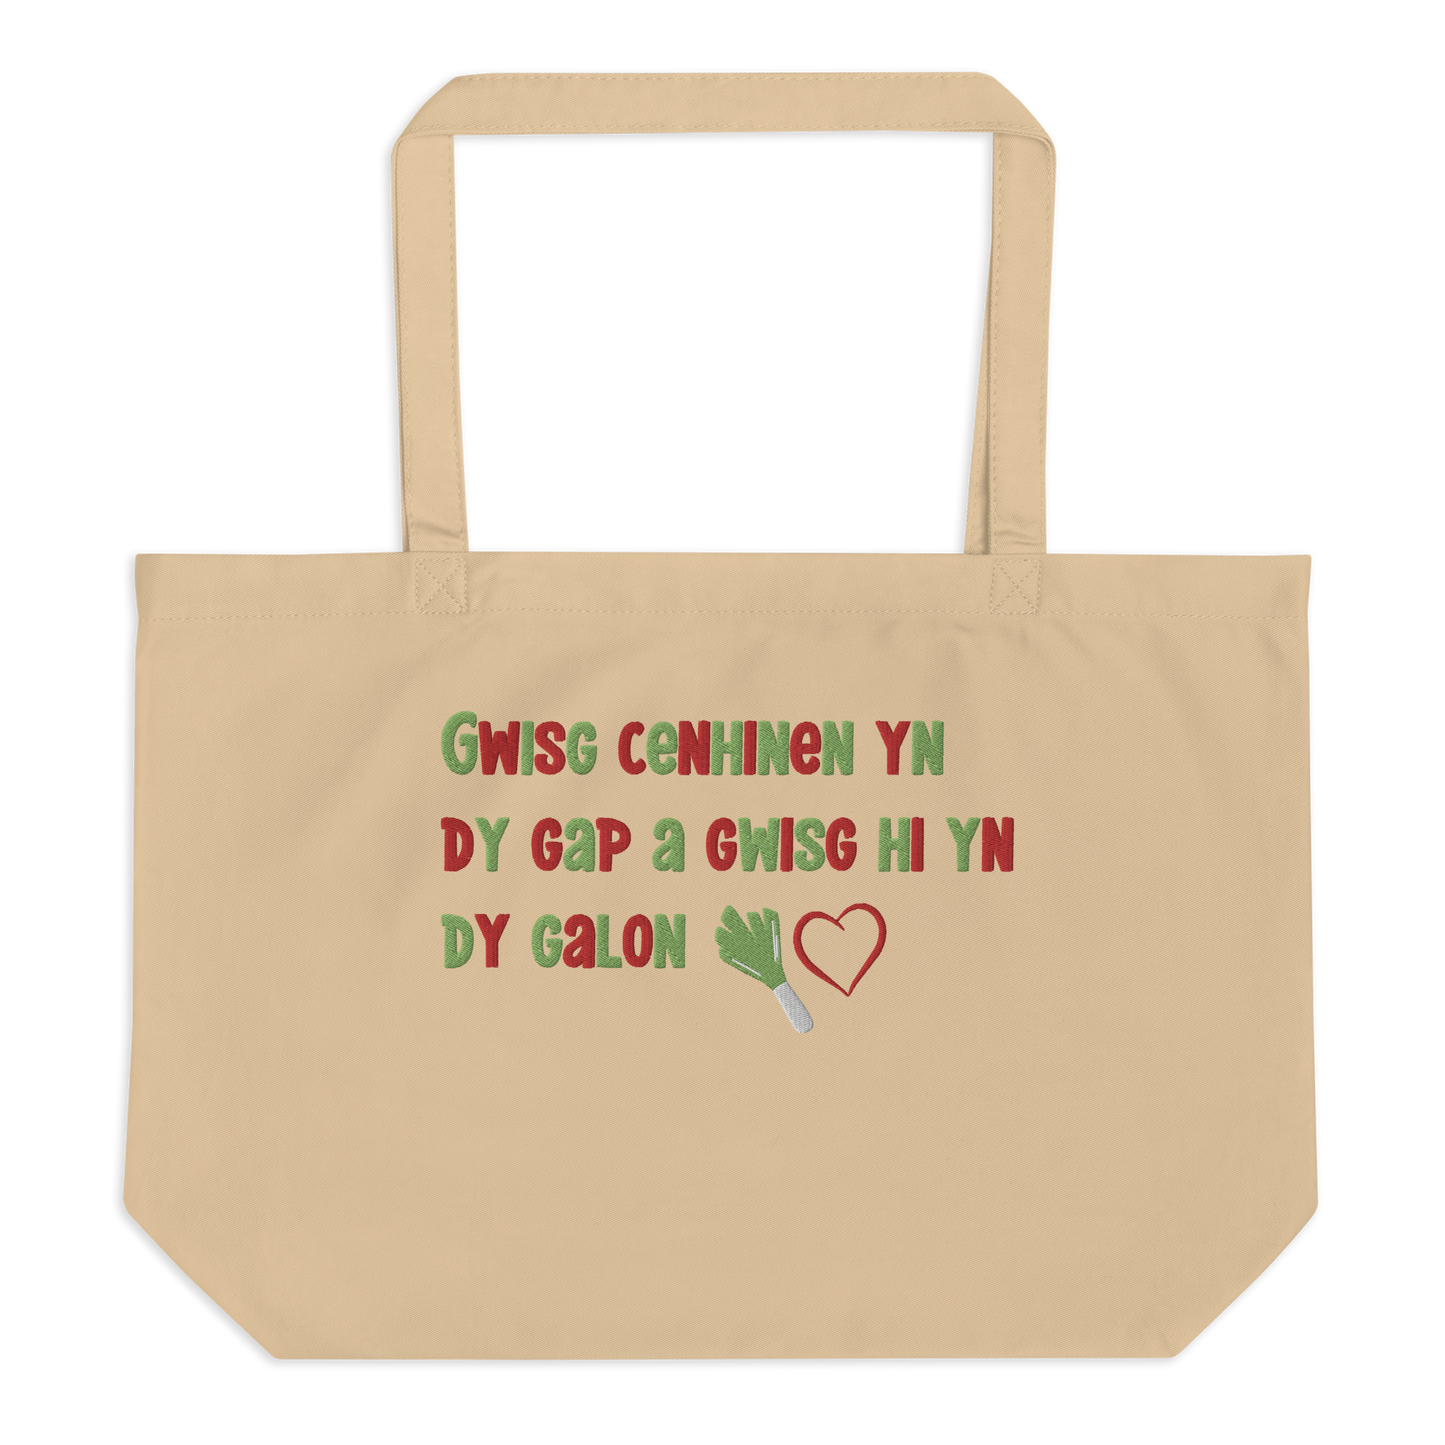 Gwisg Cenhinen Large Welsh Language Embroidered Tote bag